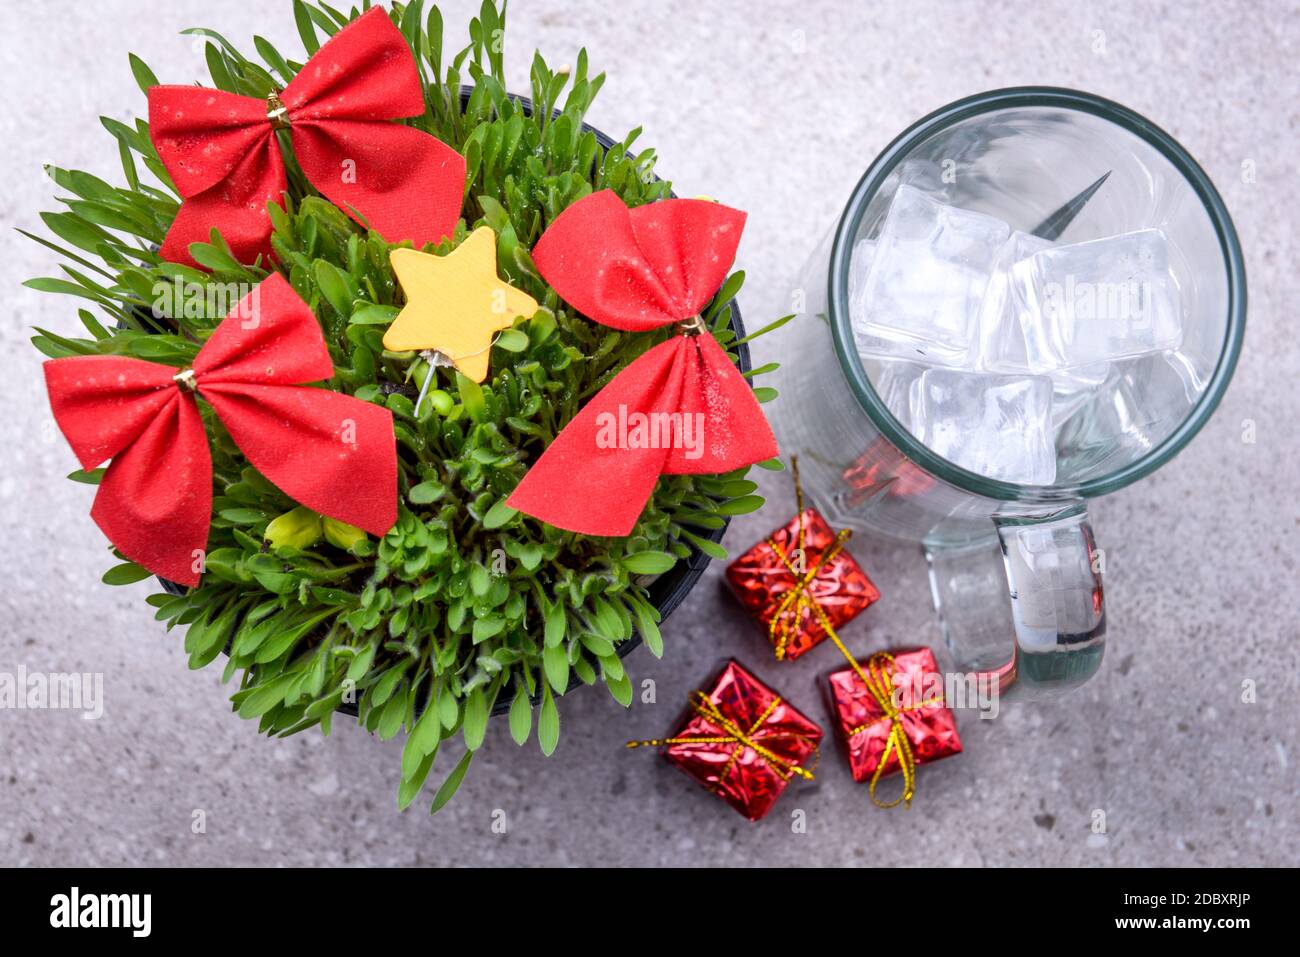 Close up view of millet grass plant with Christmas ornament in the pot and glasses with an ice cube on the desk Stock Photo